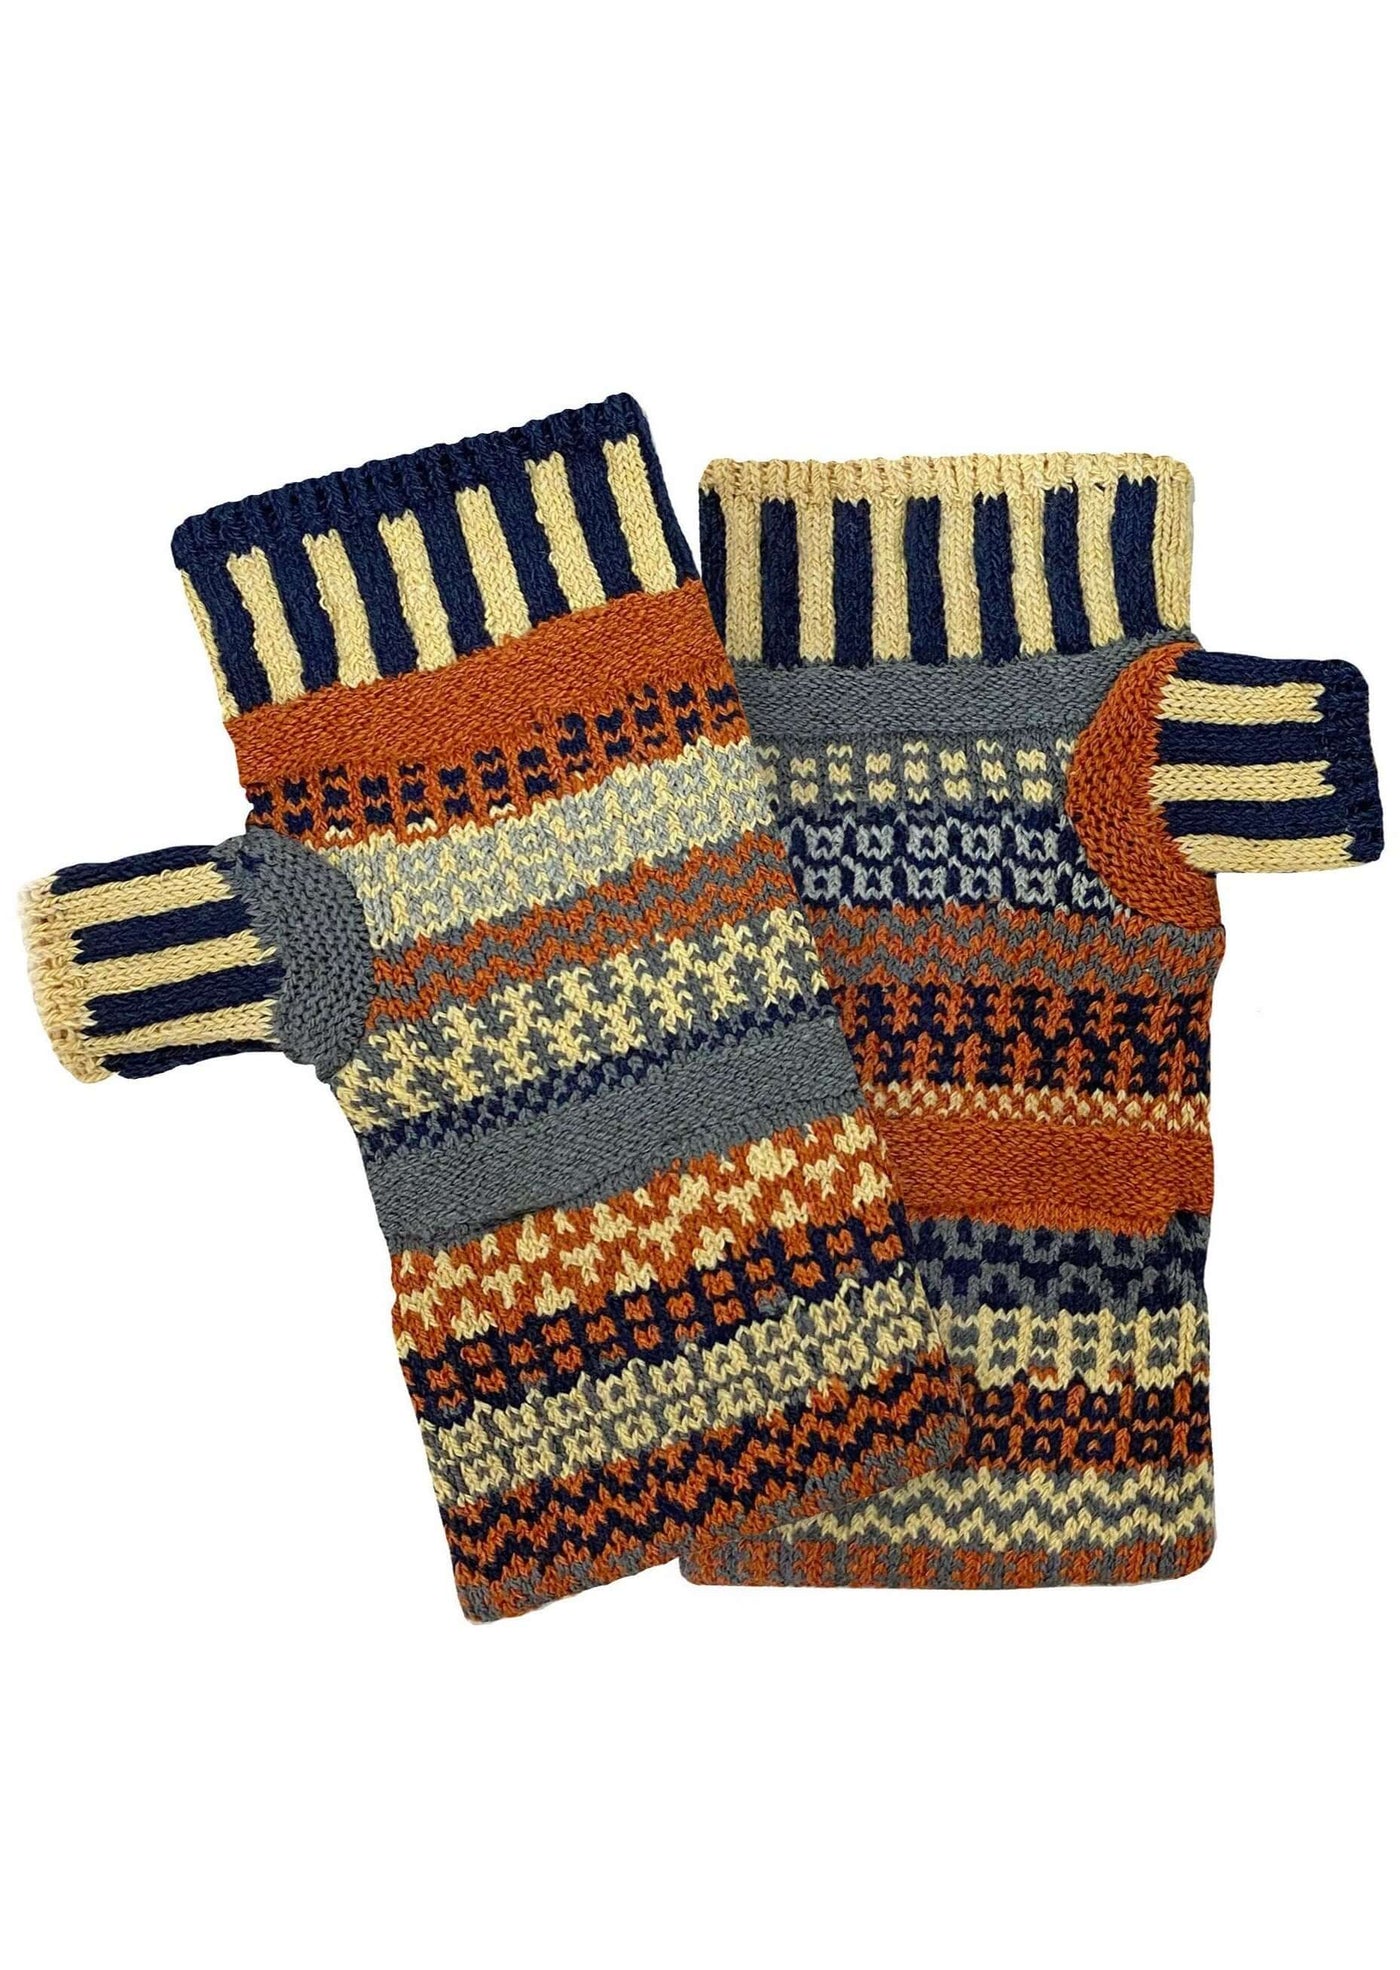 Solmate NUTMEG Knitted Fingerless Mittens with Colors creamy yellow, rustic orange, navy, blue-gray, periwinkle | Made in USA | Classy Cozy Cool Women's Made in America Clothing Boutique